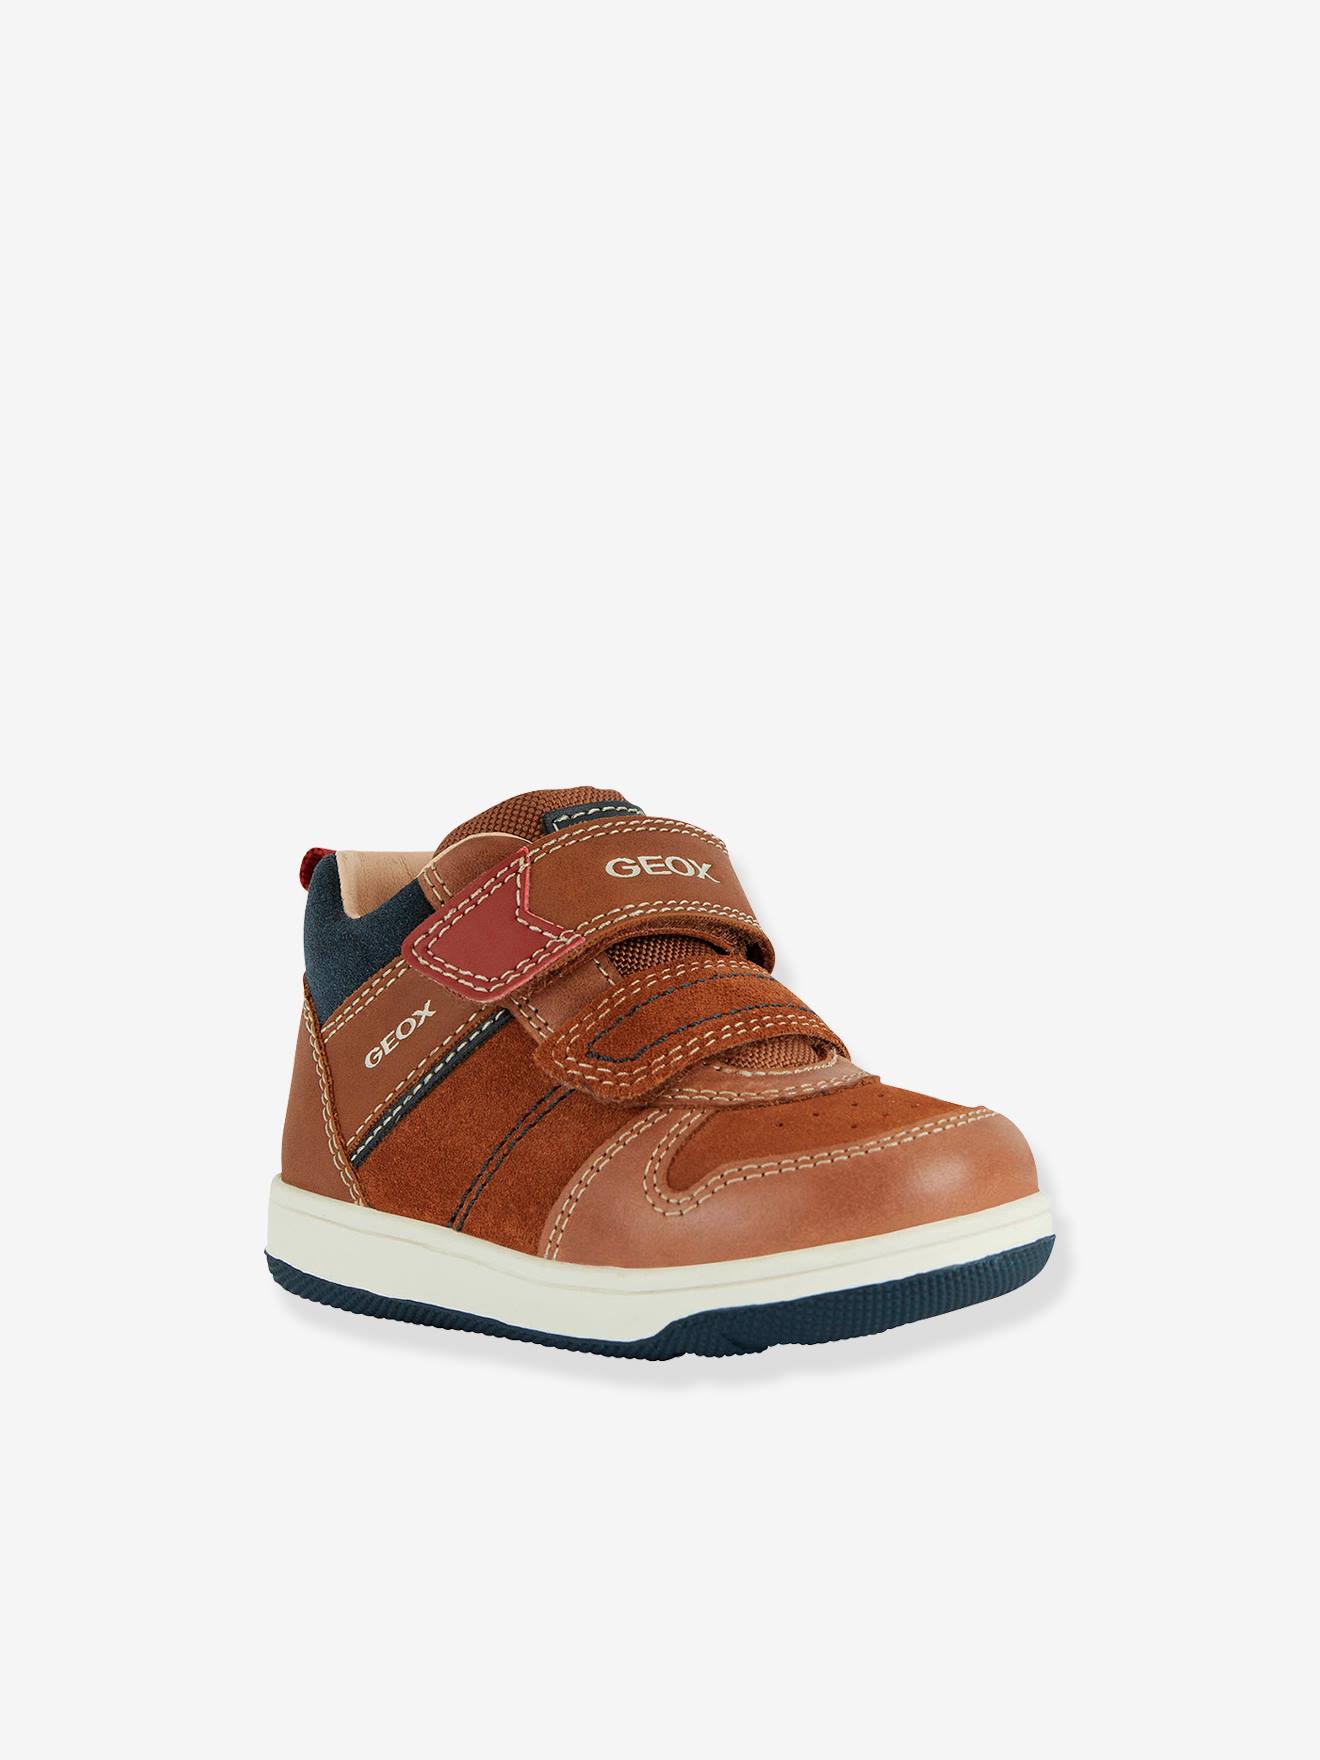 Oso polar Chaleco calculadora High Top Trainers for Baby, New Flick Boy by GEOX®, Shoes